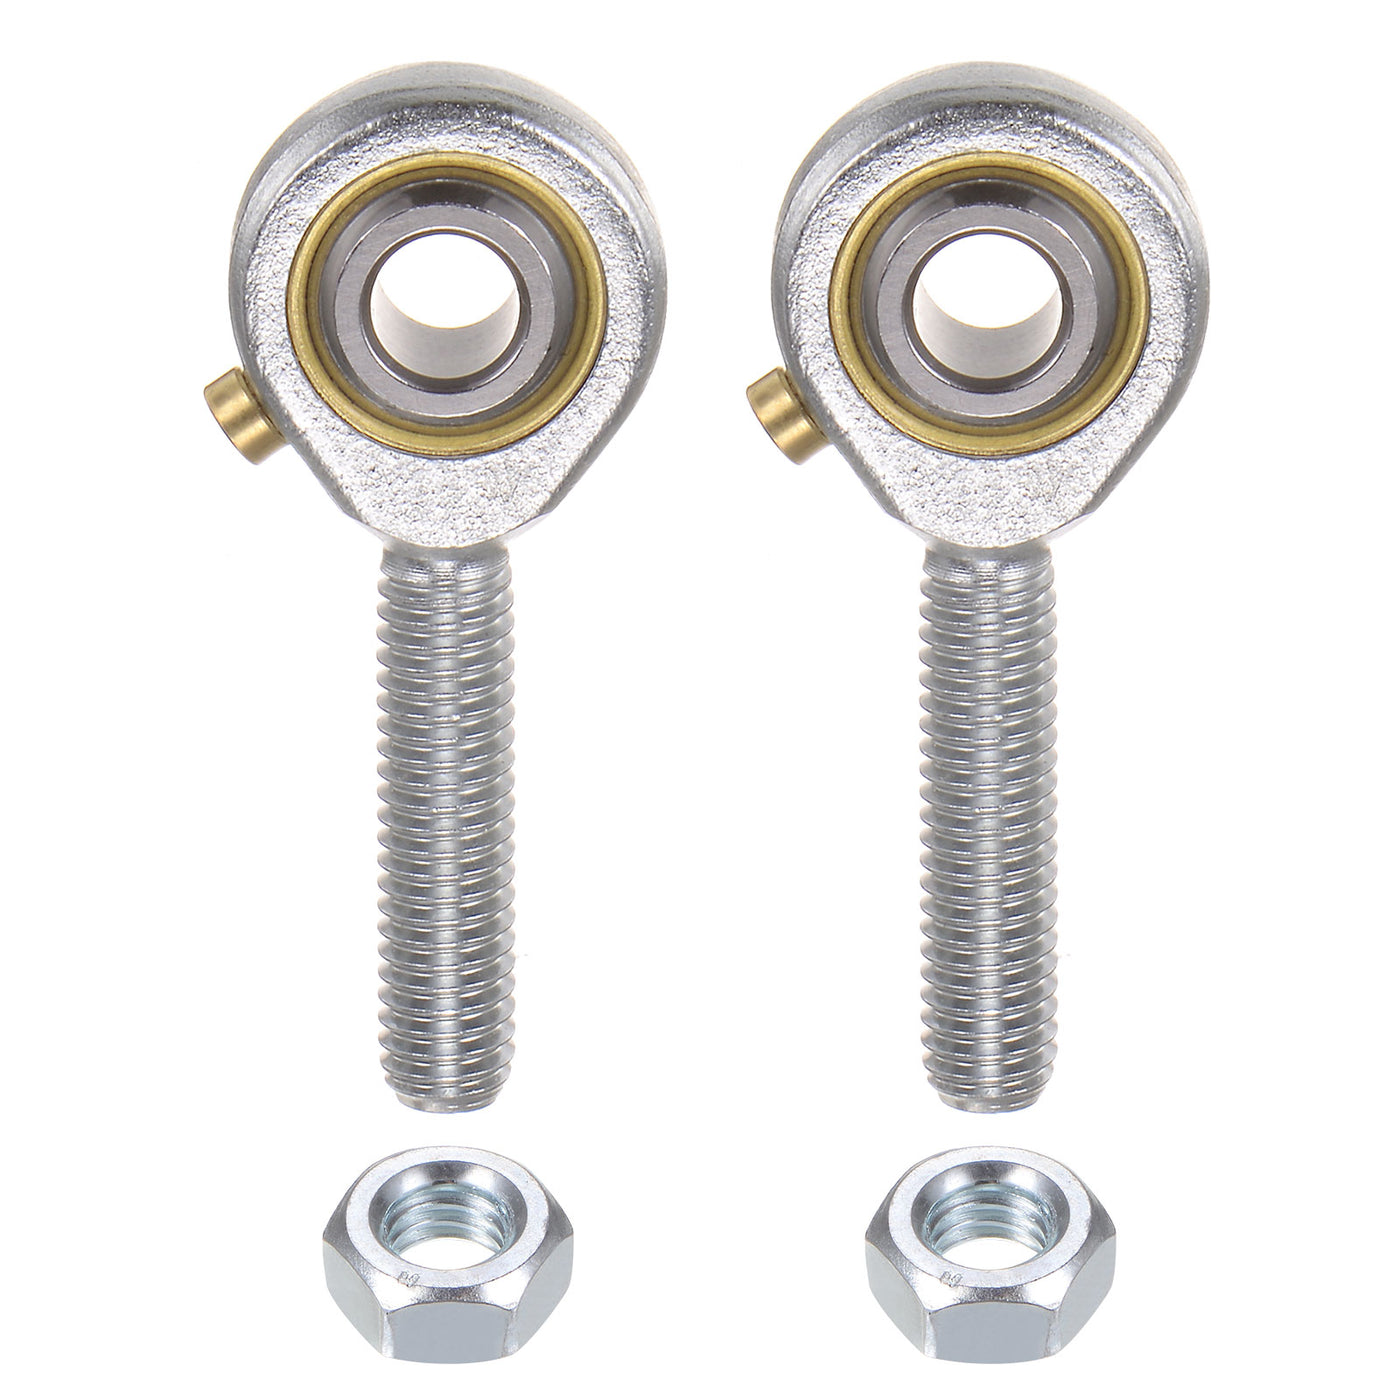 uxcell Uxcell 2pcs POS6 M6 Male Rod End Bearing M6x1 Right Hand Thread,Includes Jam Nut